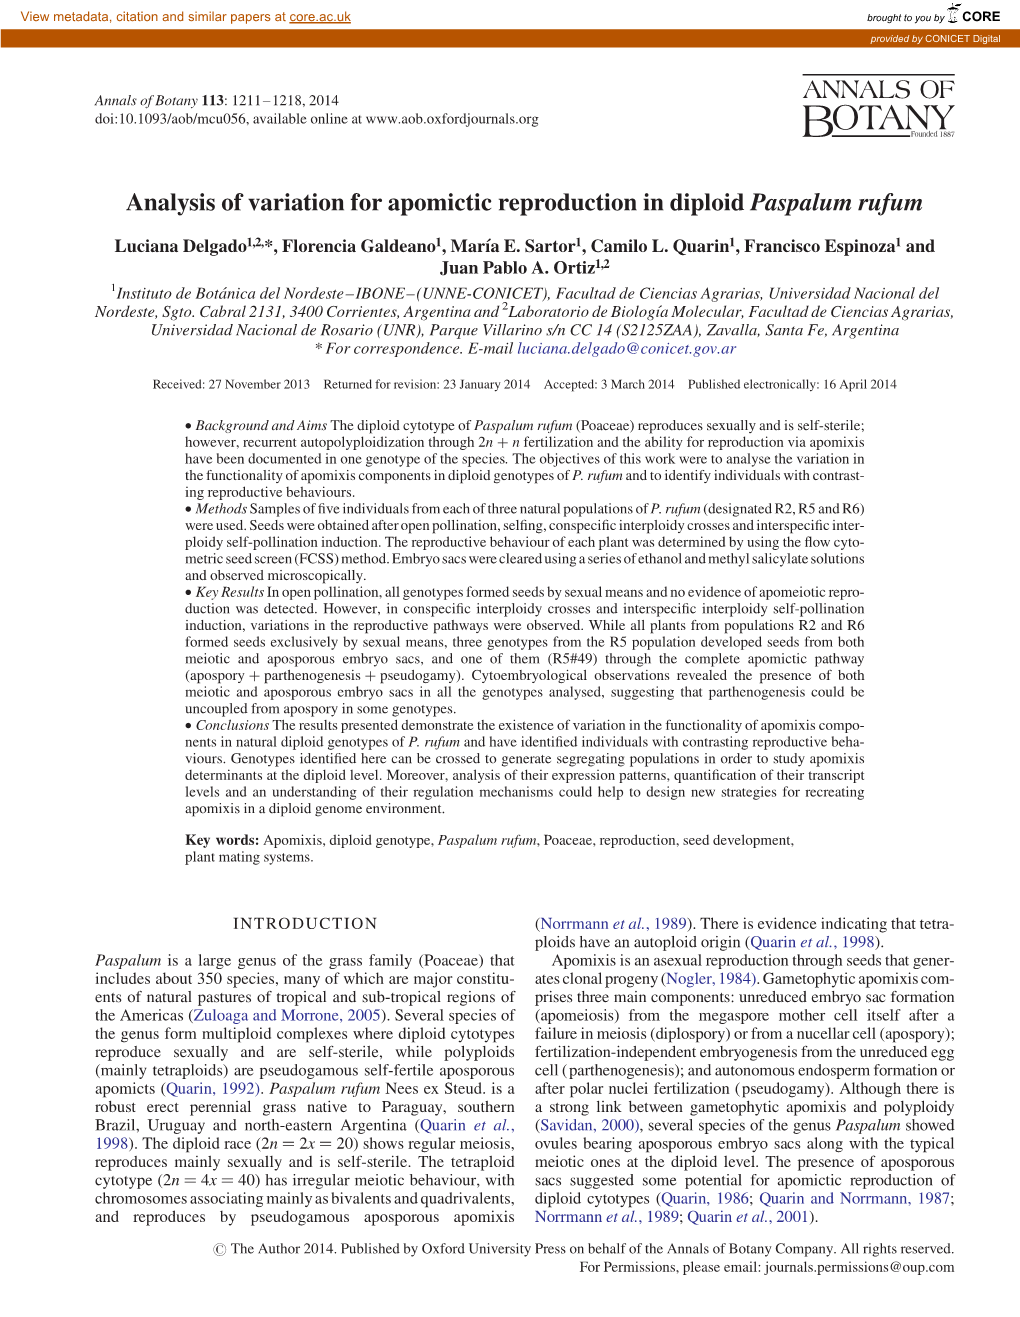 Analysis of Variation for Apomictic Reproduction in Diploid Paspalum Rufum